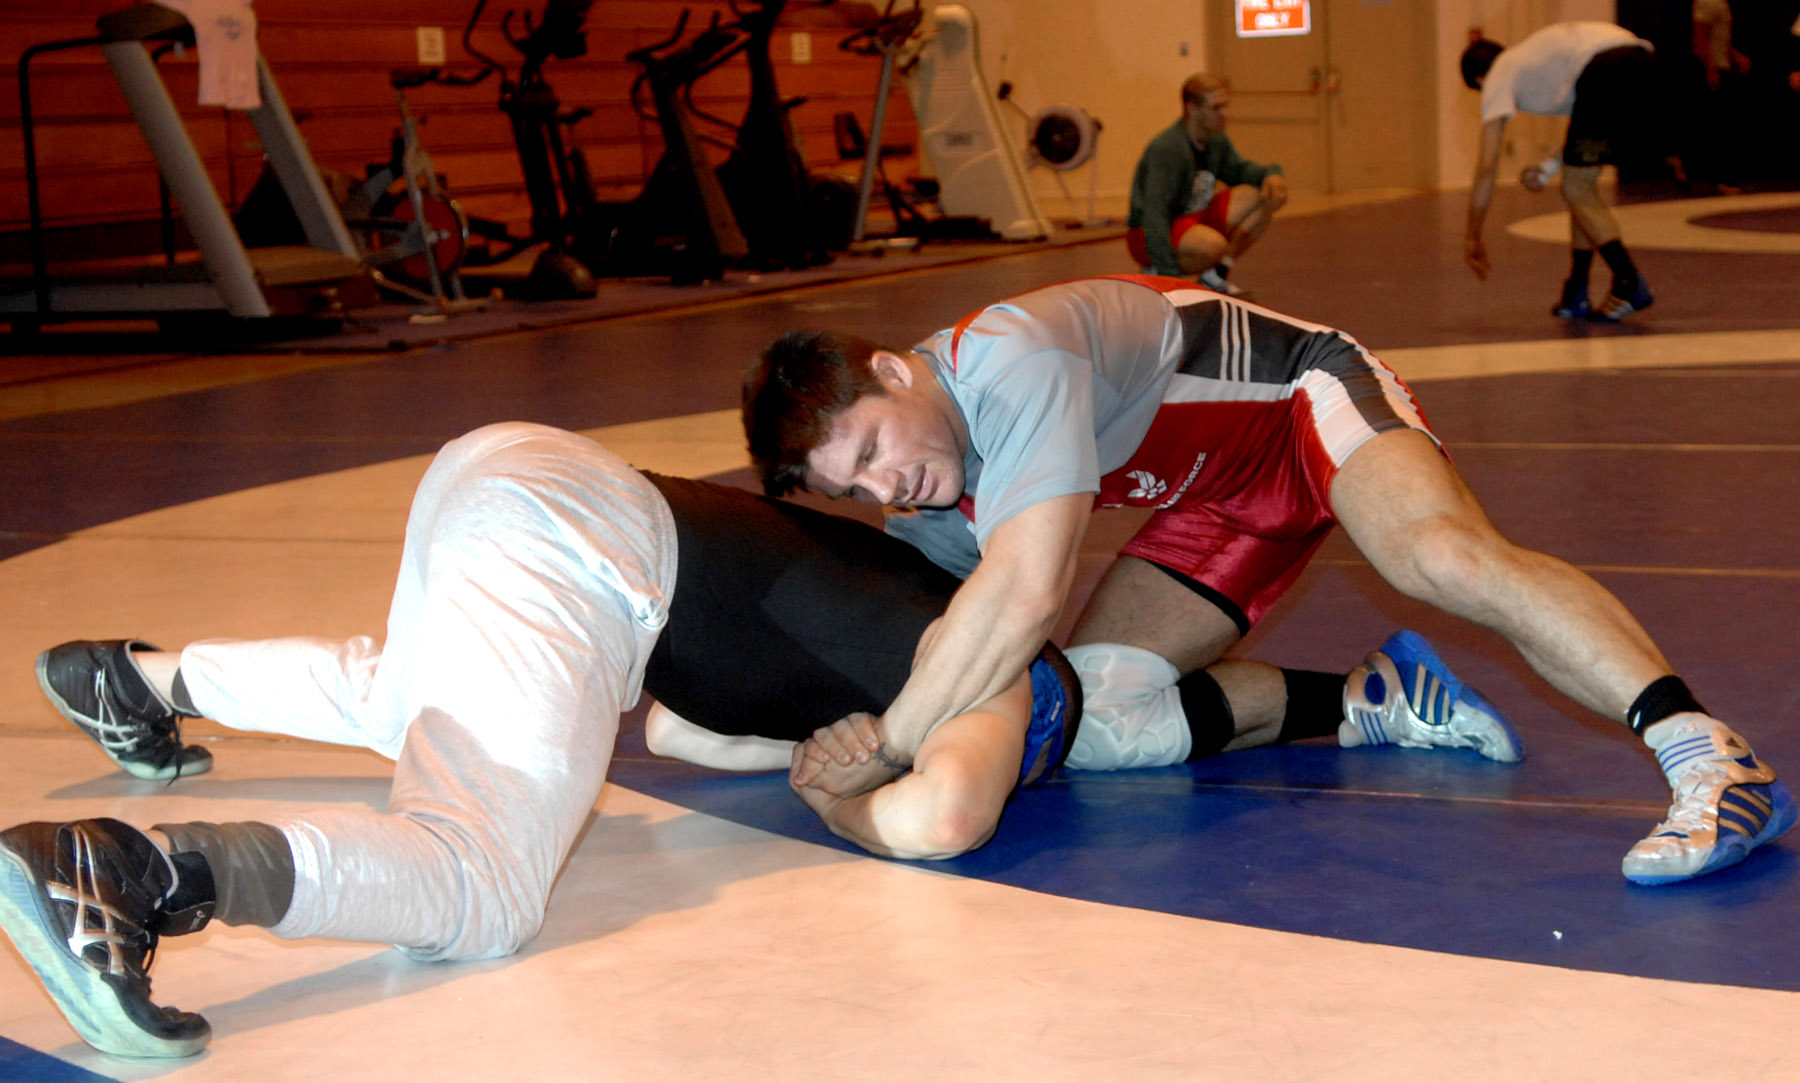 Air Force Wrestling Team selects athletes for 2008 season